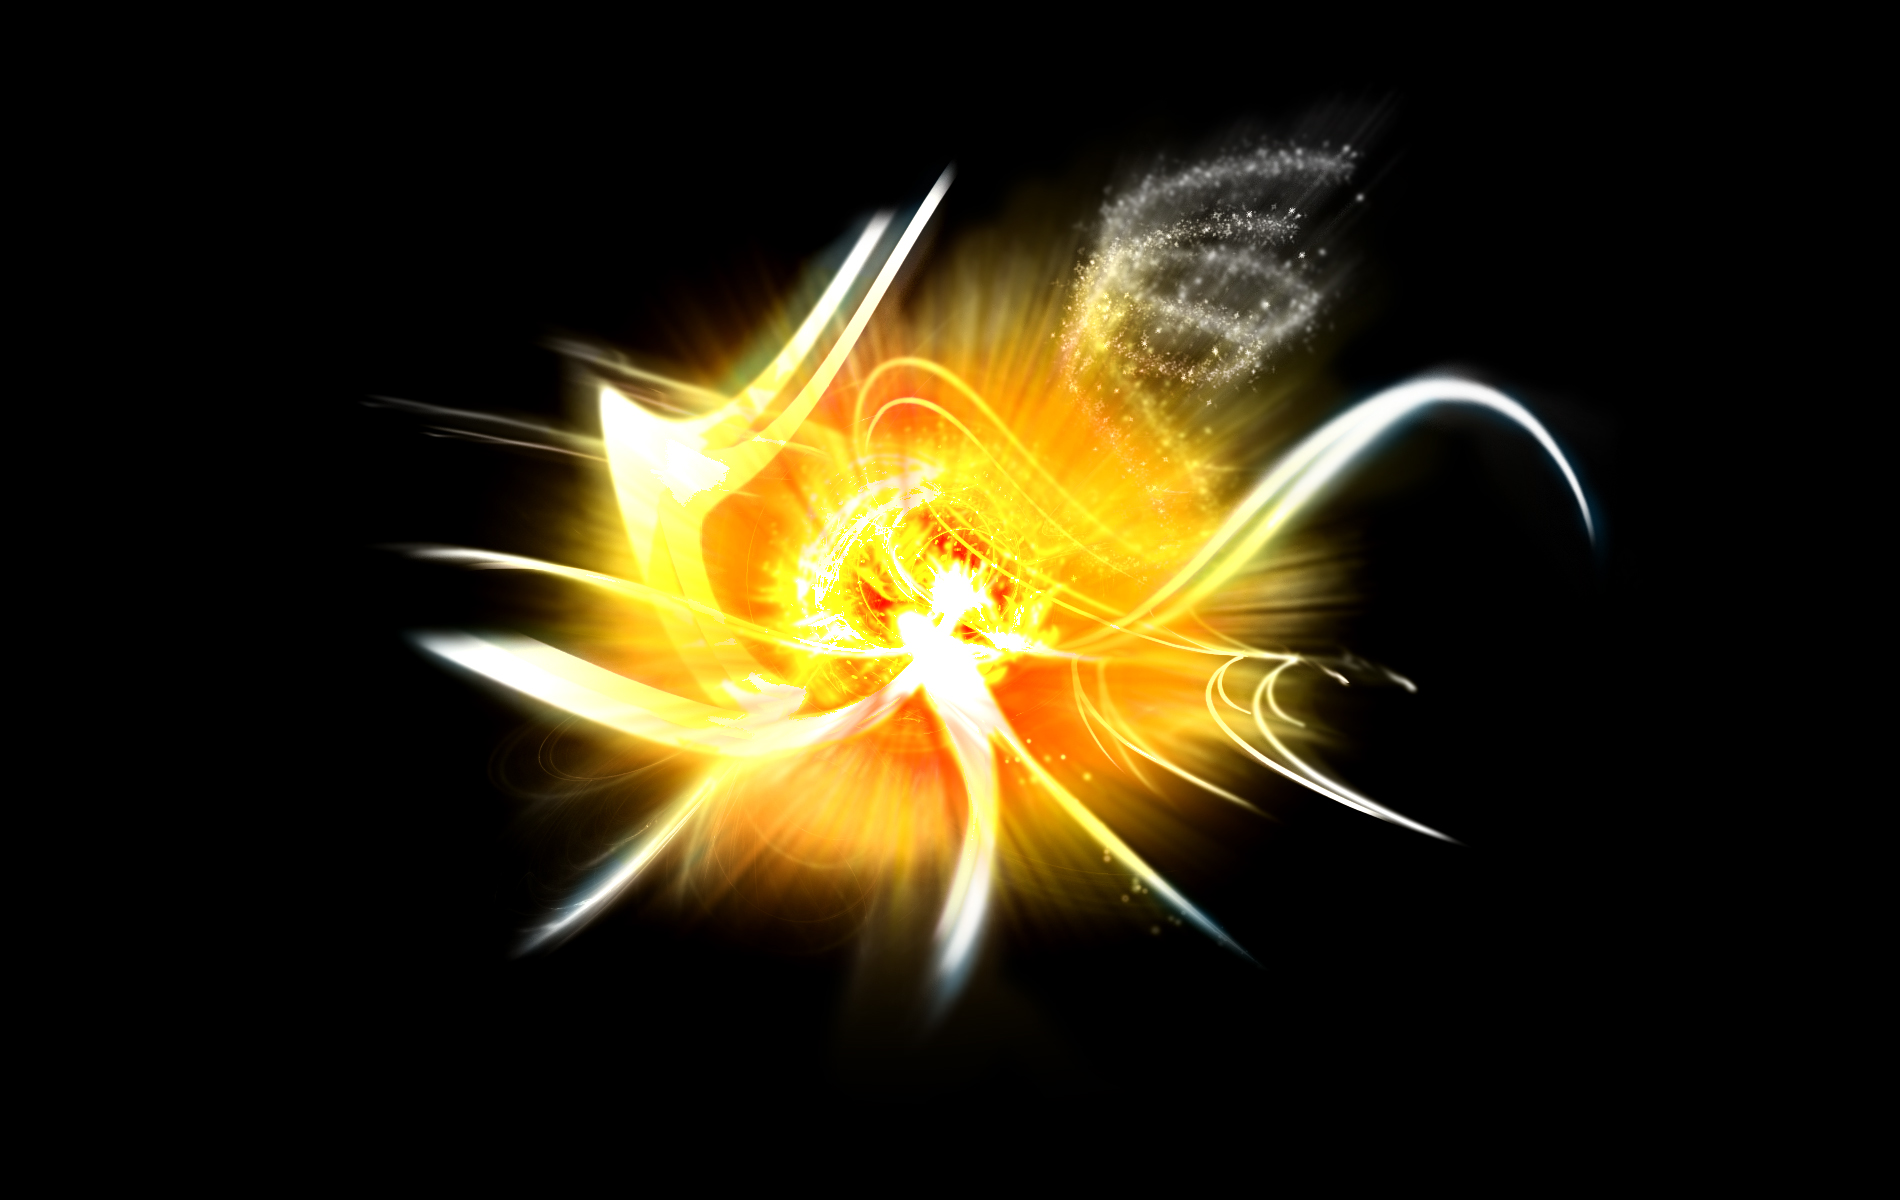 Detail Explosion Background Hd Nomer 50